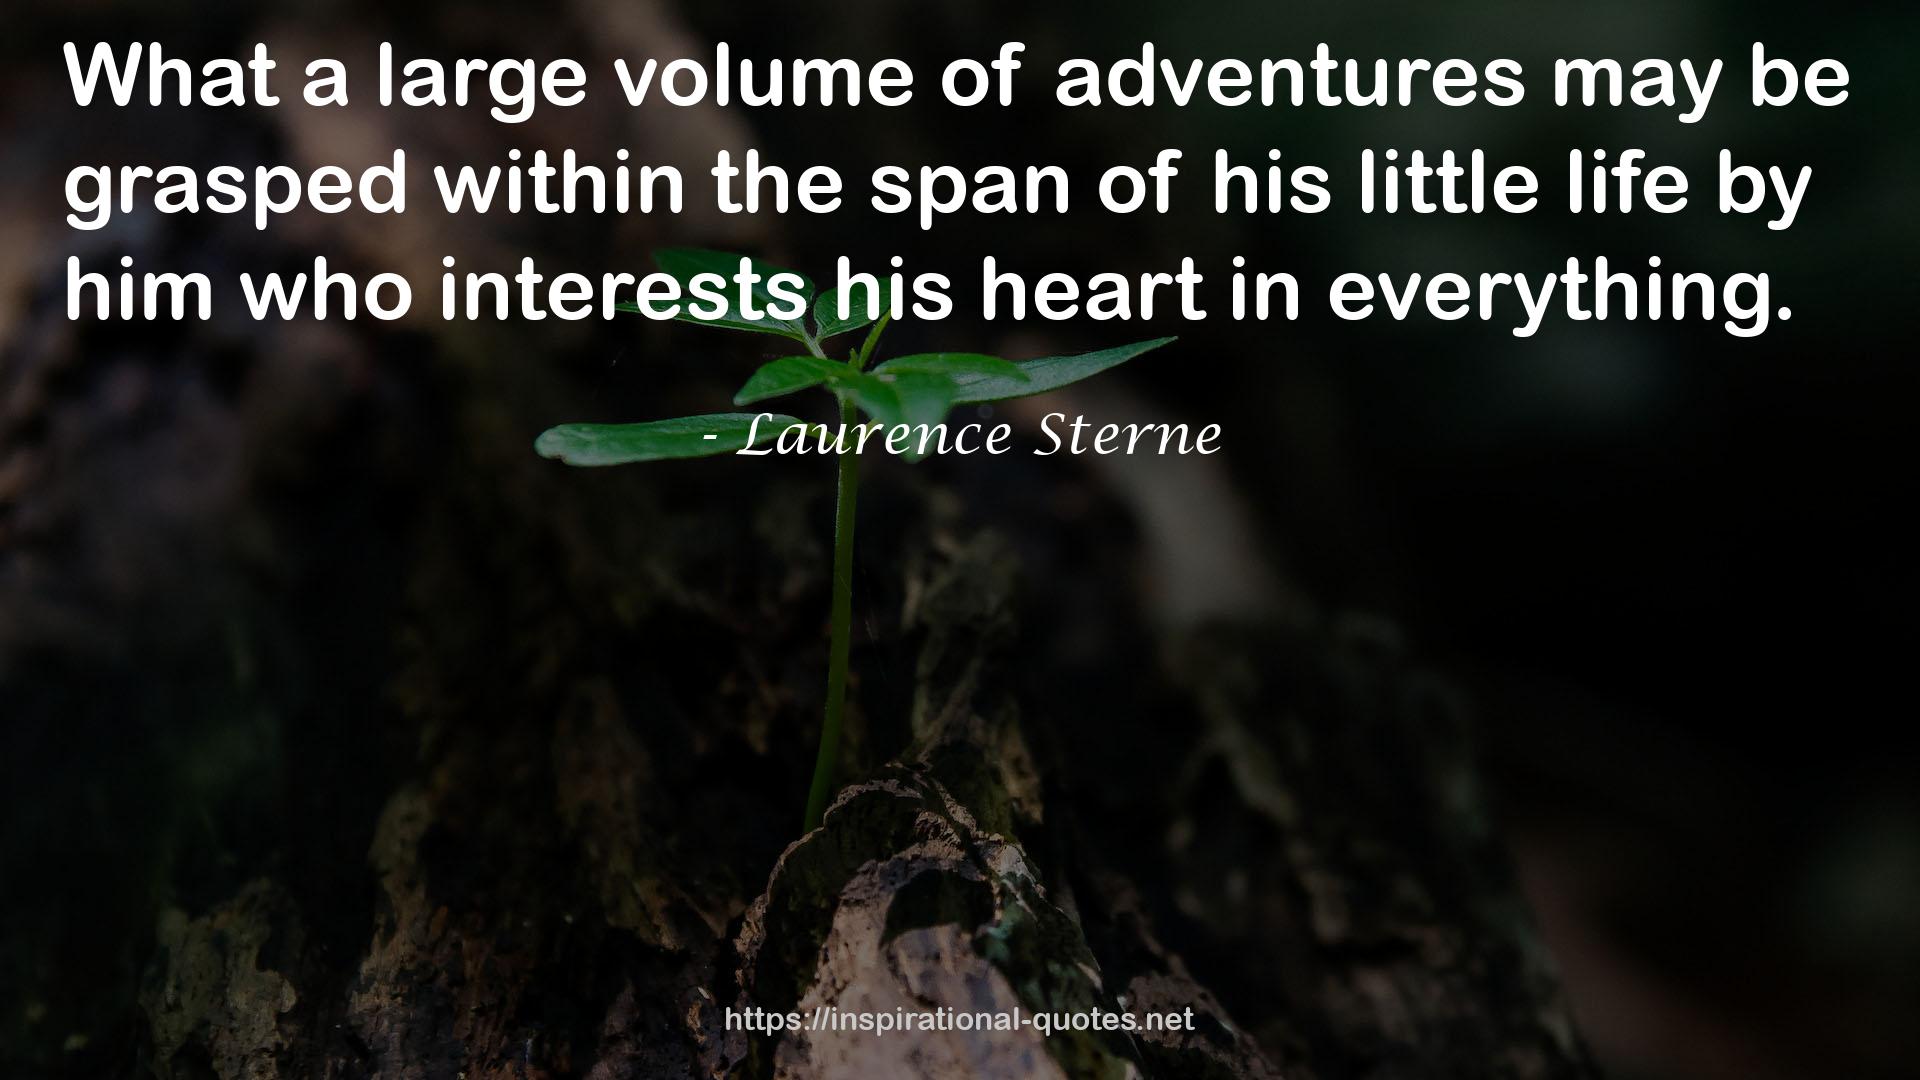 Laurence Sterne QUOTES